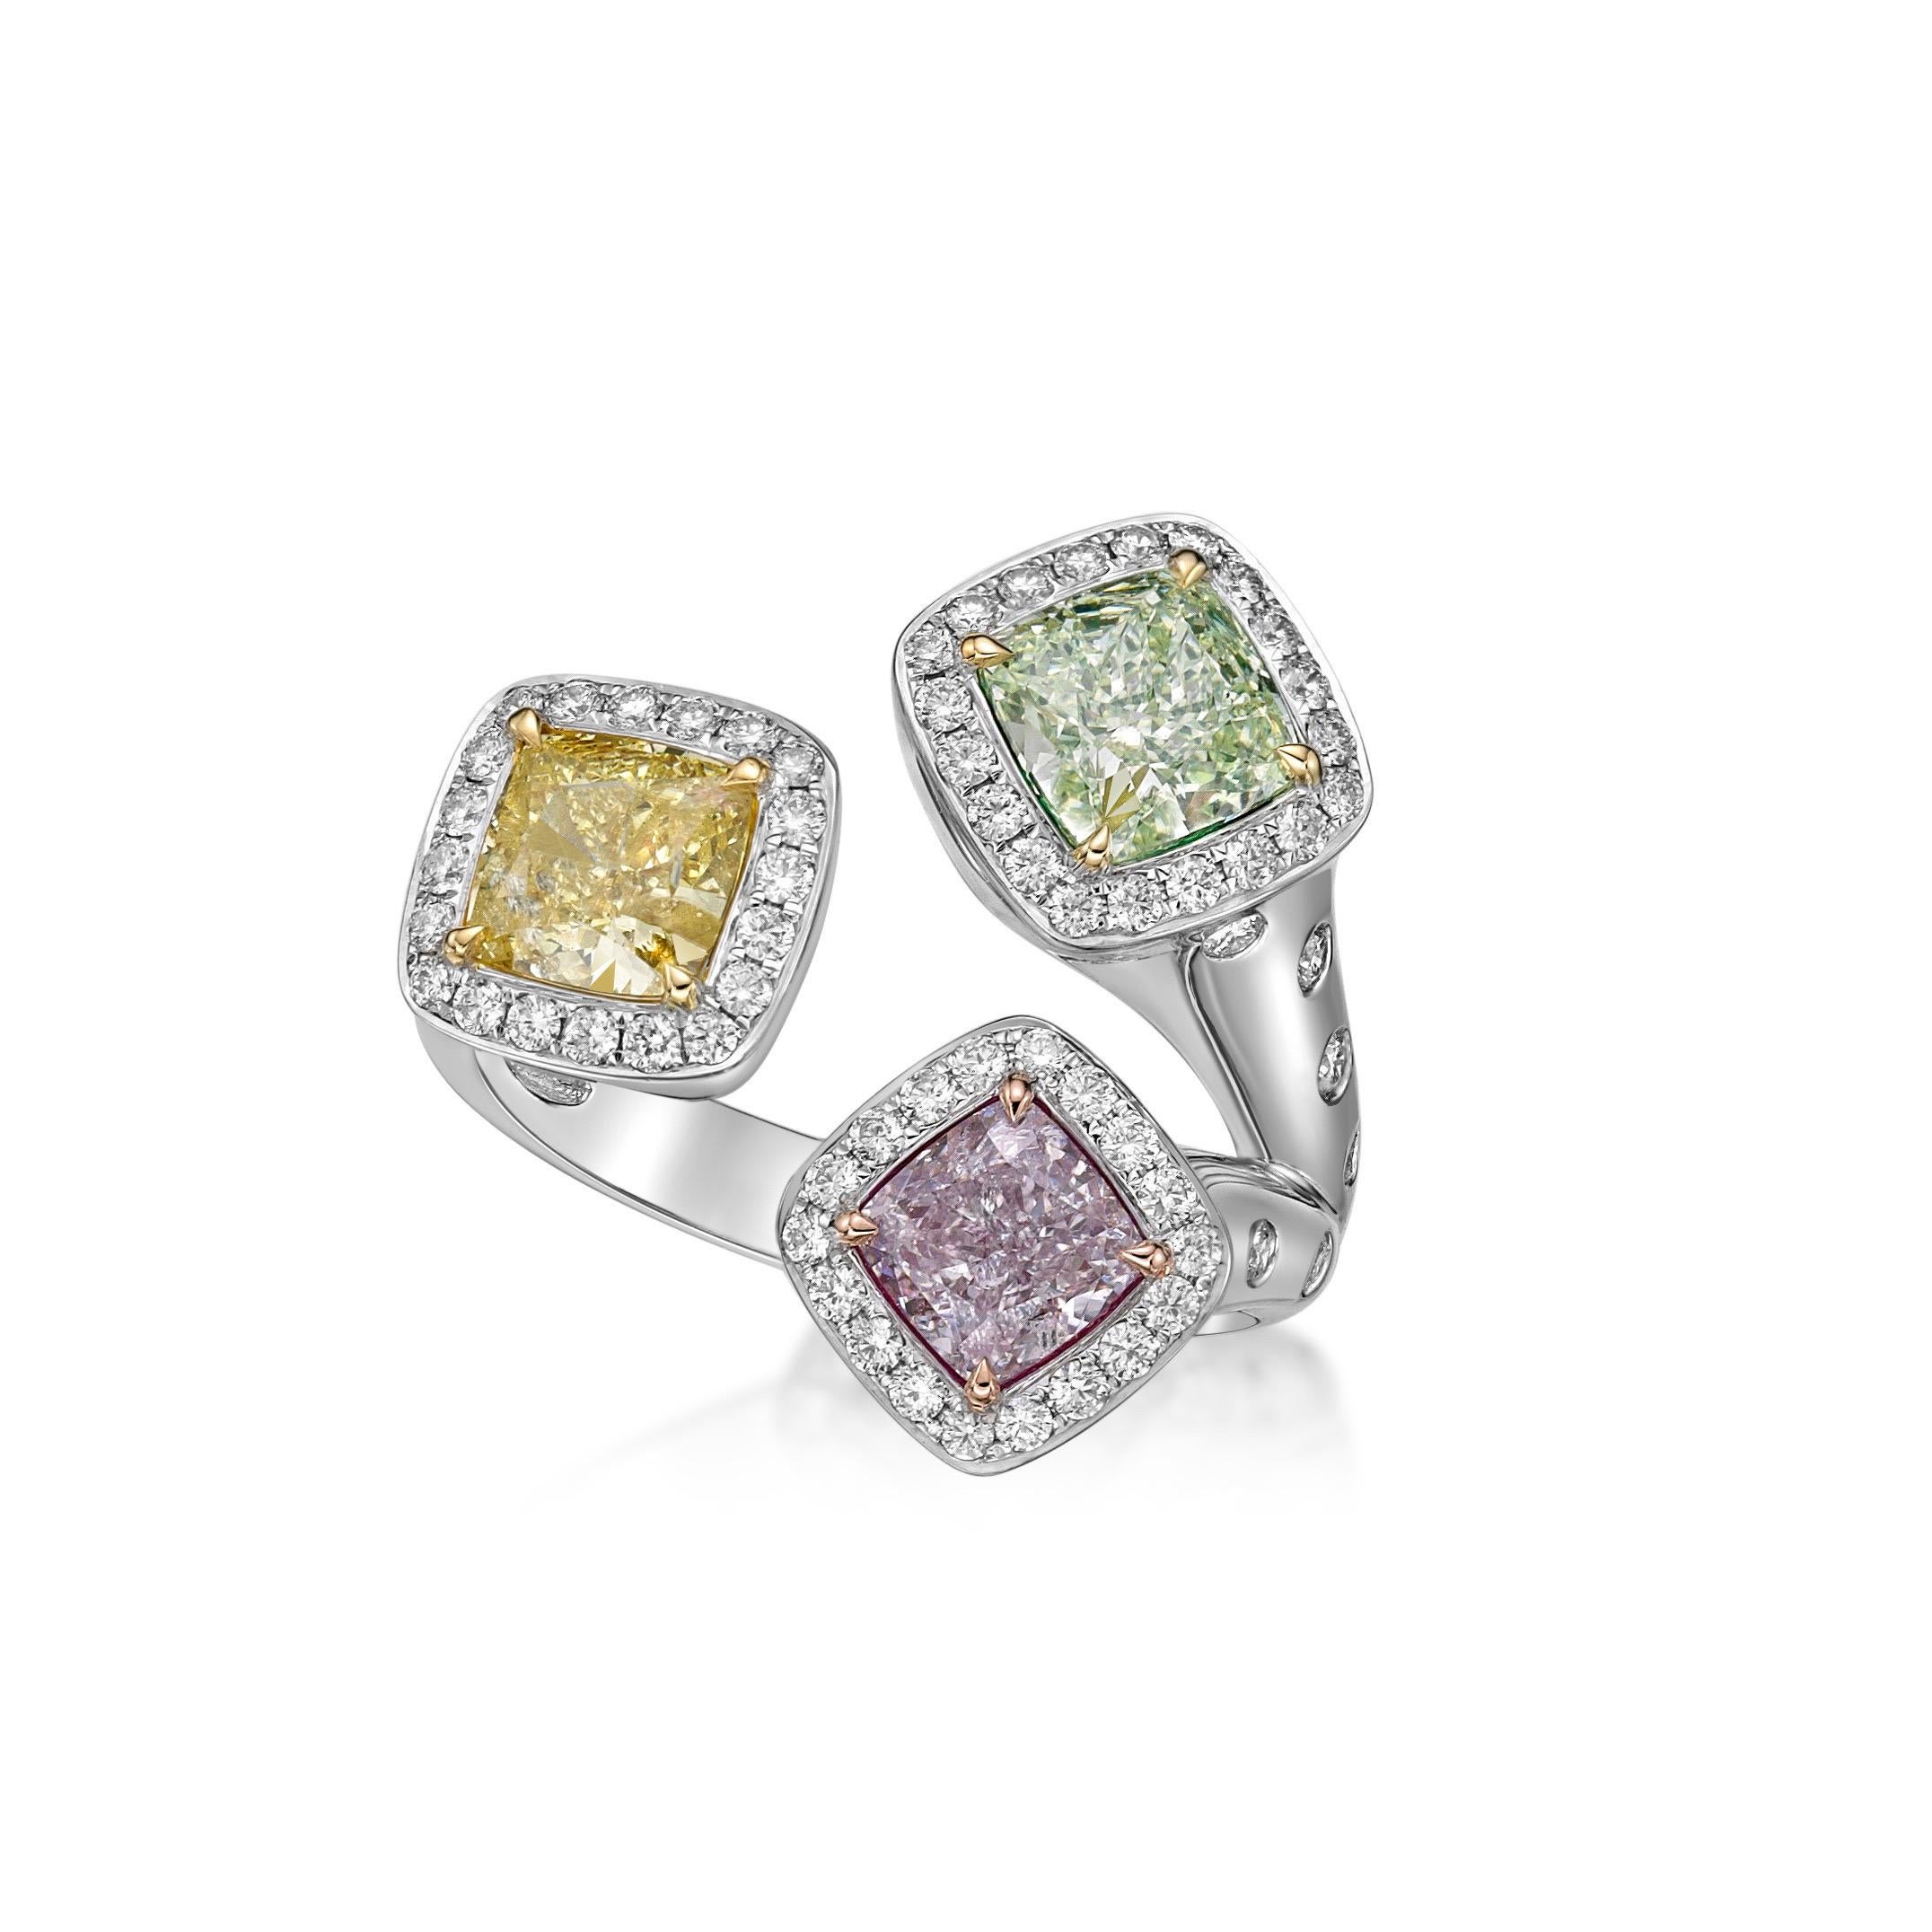 3 Gia Certified Natural cushion diamonds weighing over 1.00 Carats each totaling over 3.00 Carats...Pink yellow and green diamonds. 
In addition 72 small diamonds totaling .59ct
From The Museum Vault at Emilio Jewelry Located on New York's iconic